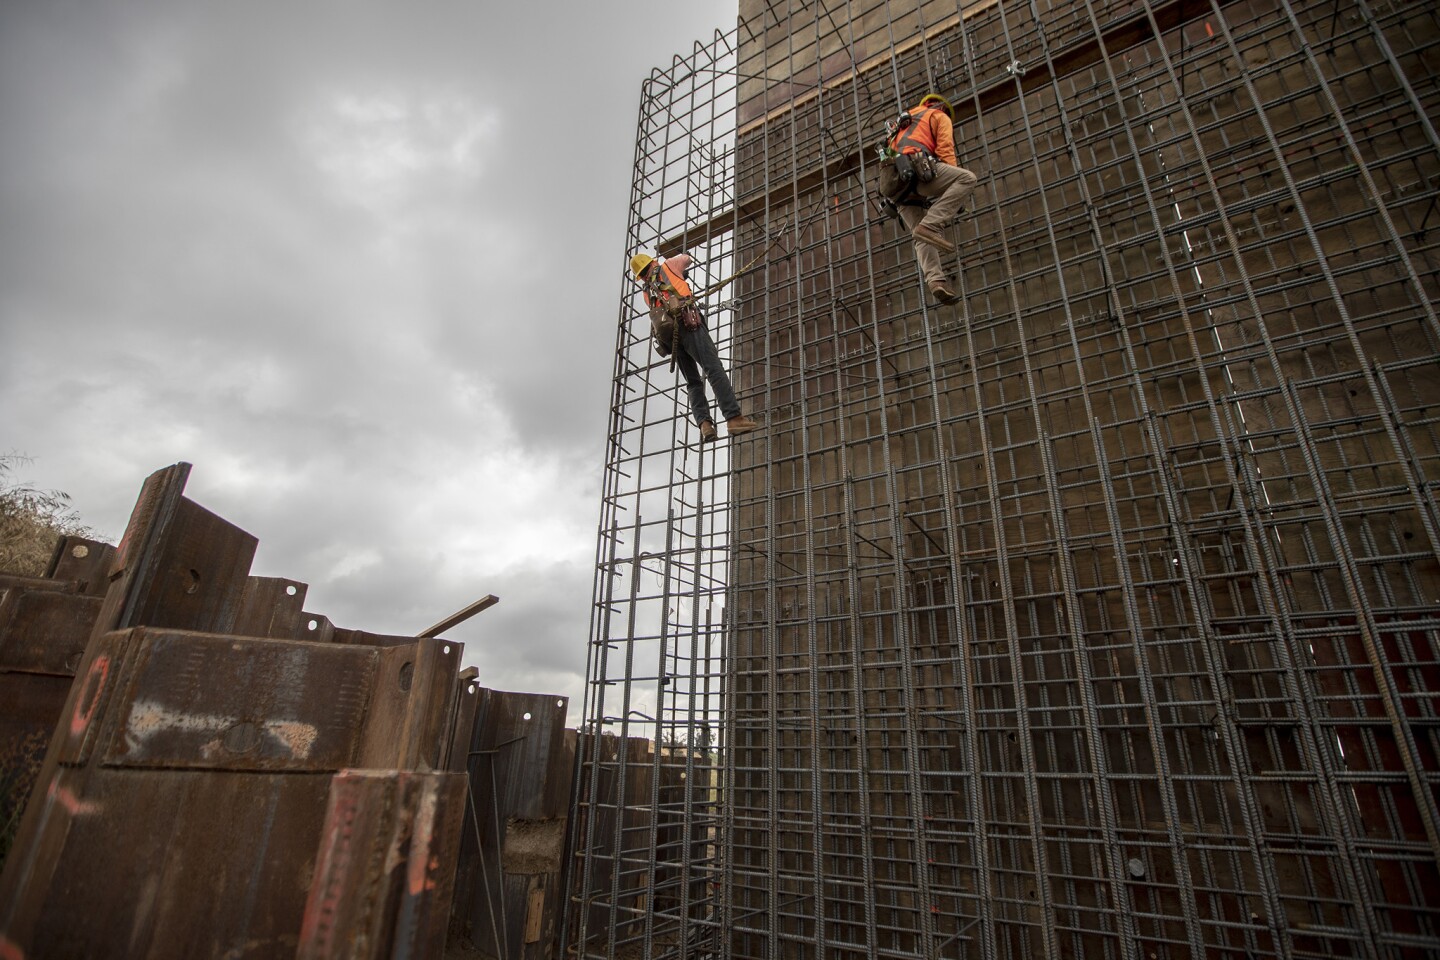 Workers tie rebar on a support structure located on the South end of the Cedar Viaduct section of the California High Speed Rail Project in Fresno.